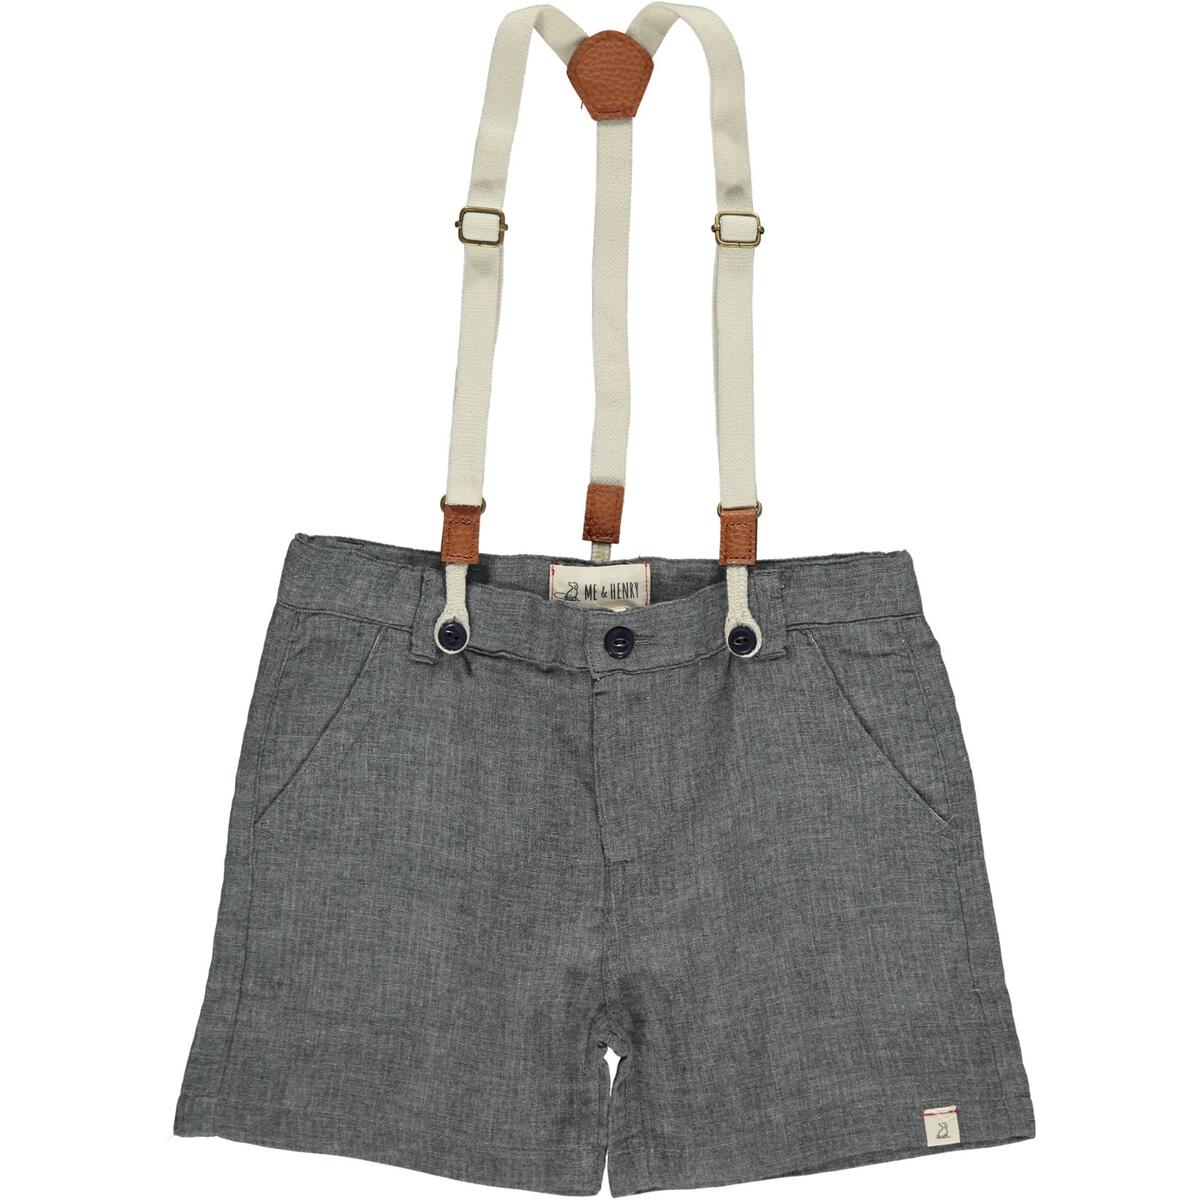 Me & Henry Captain shorts with suspenders - Grey Gauze